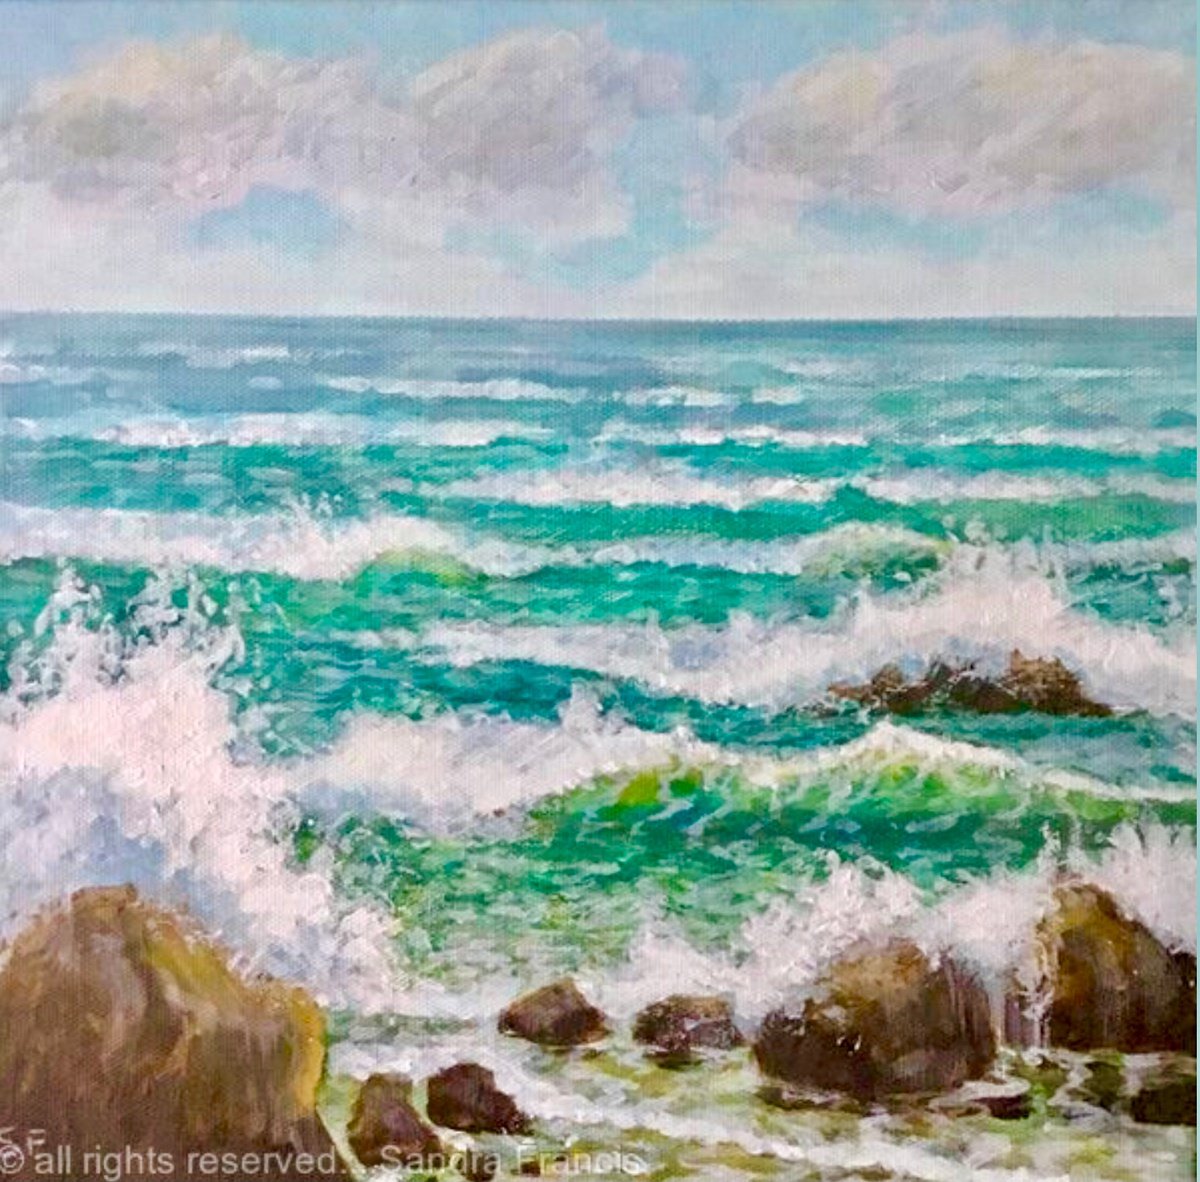 Stormy Waves by Sandra Francis